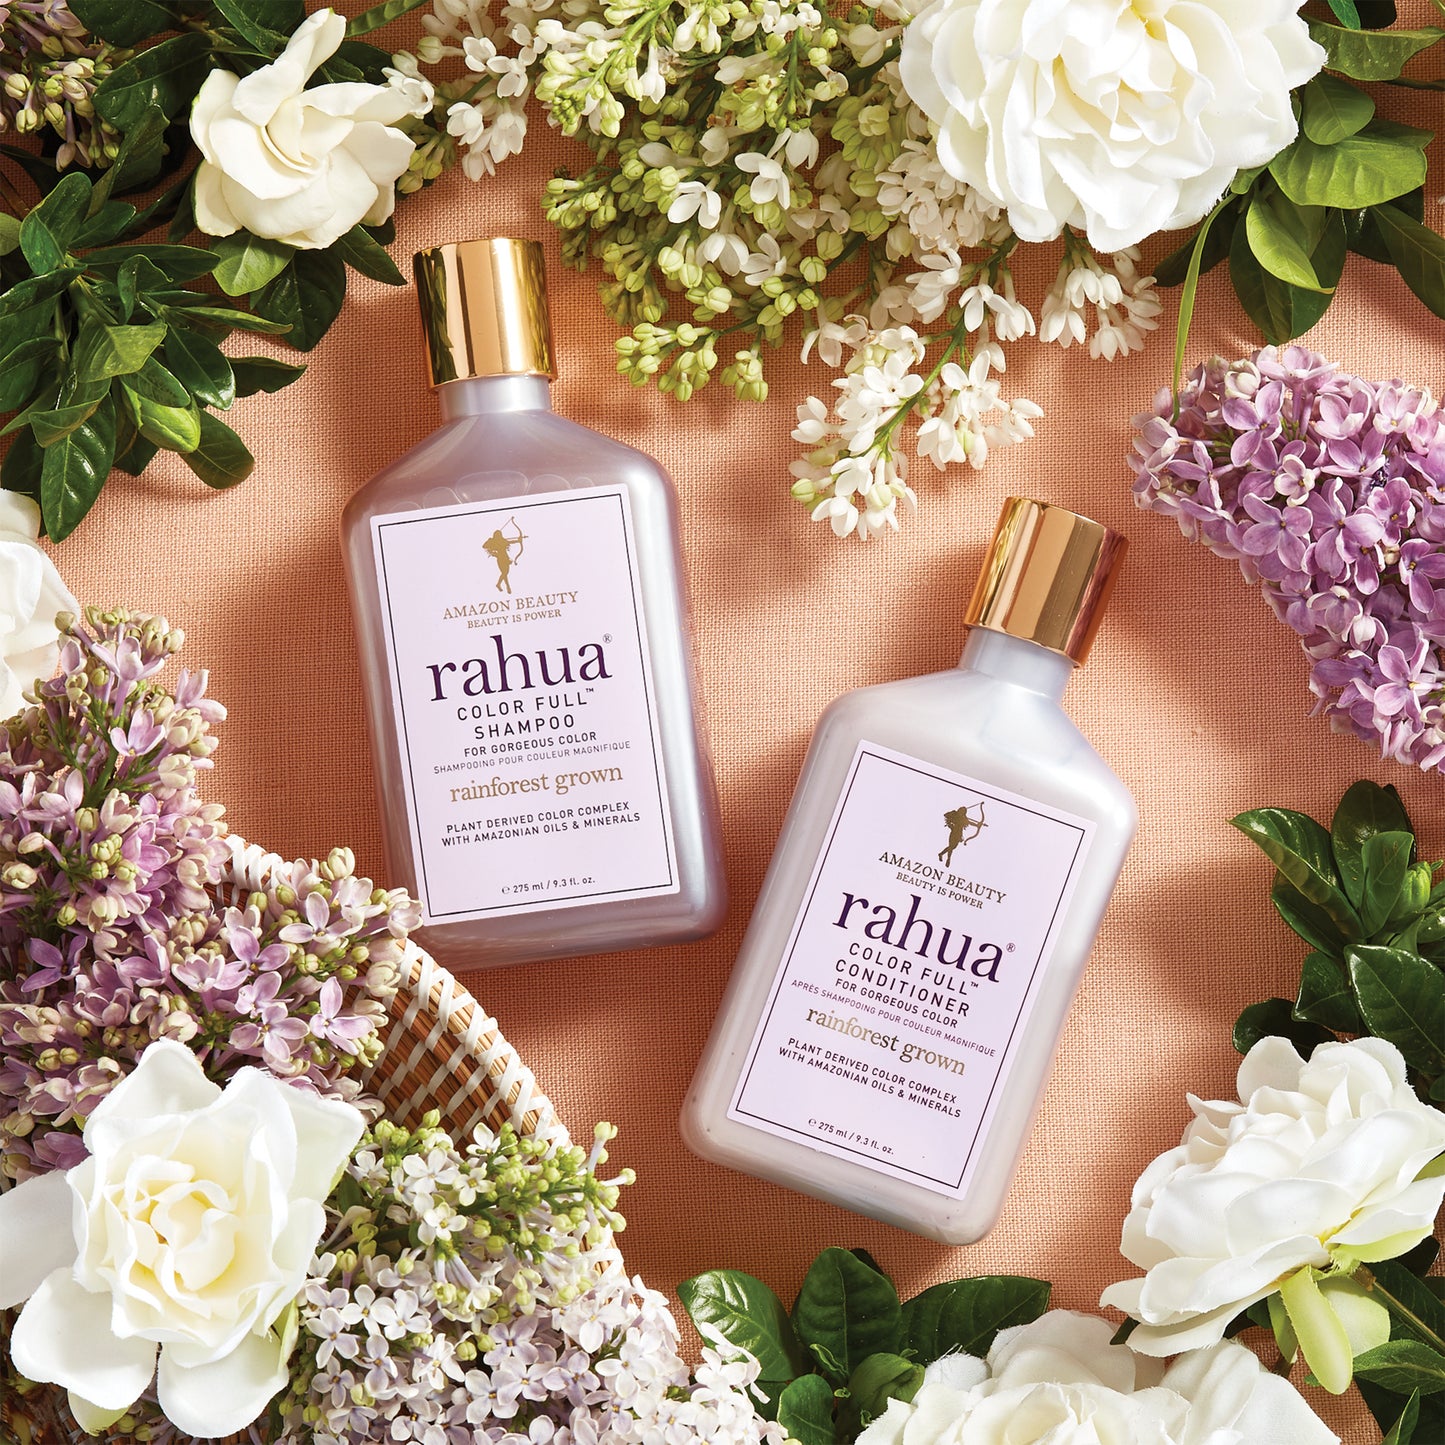 Rahua Color Full Shampoo and conditioner with flowers